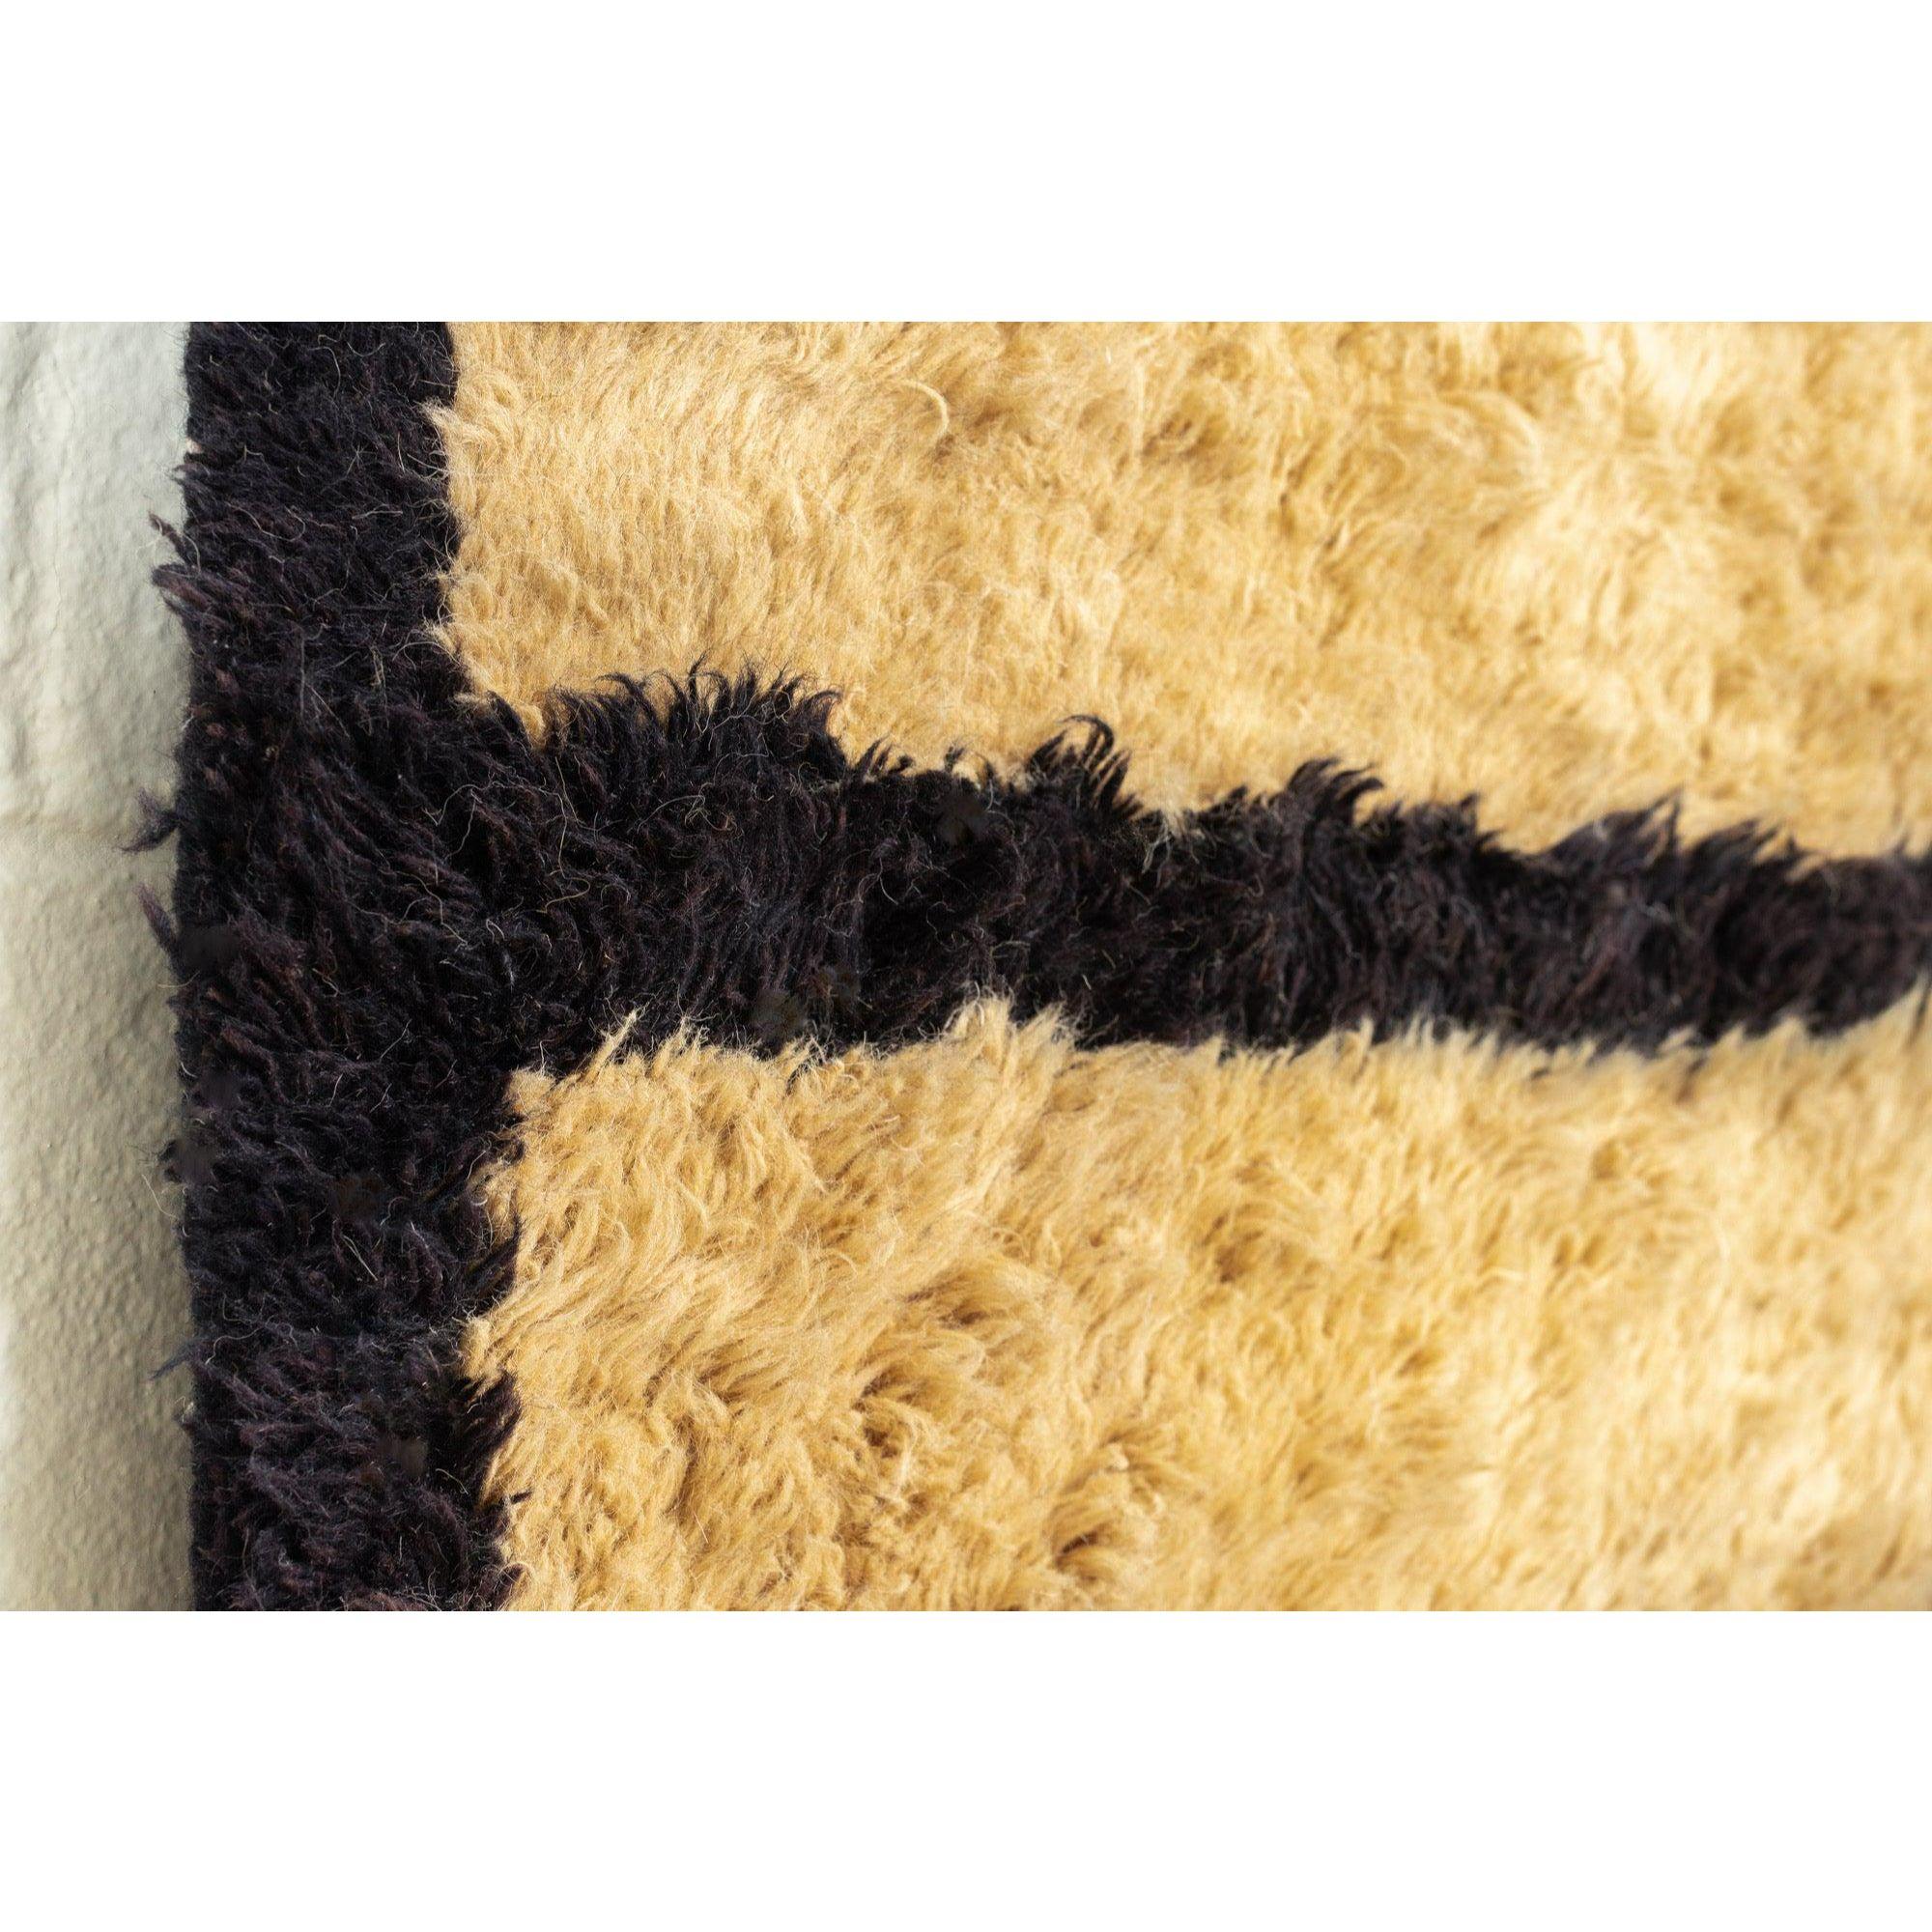 Vintage Turkish Floor Rug in Beige and Black Striped Shaggy Wool For Sale 3